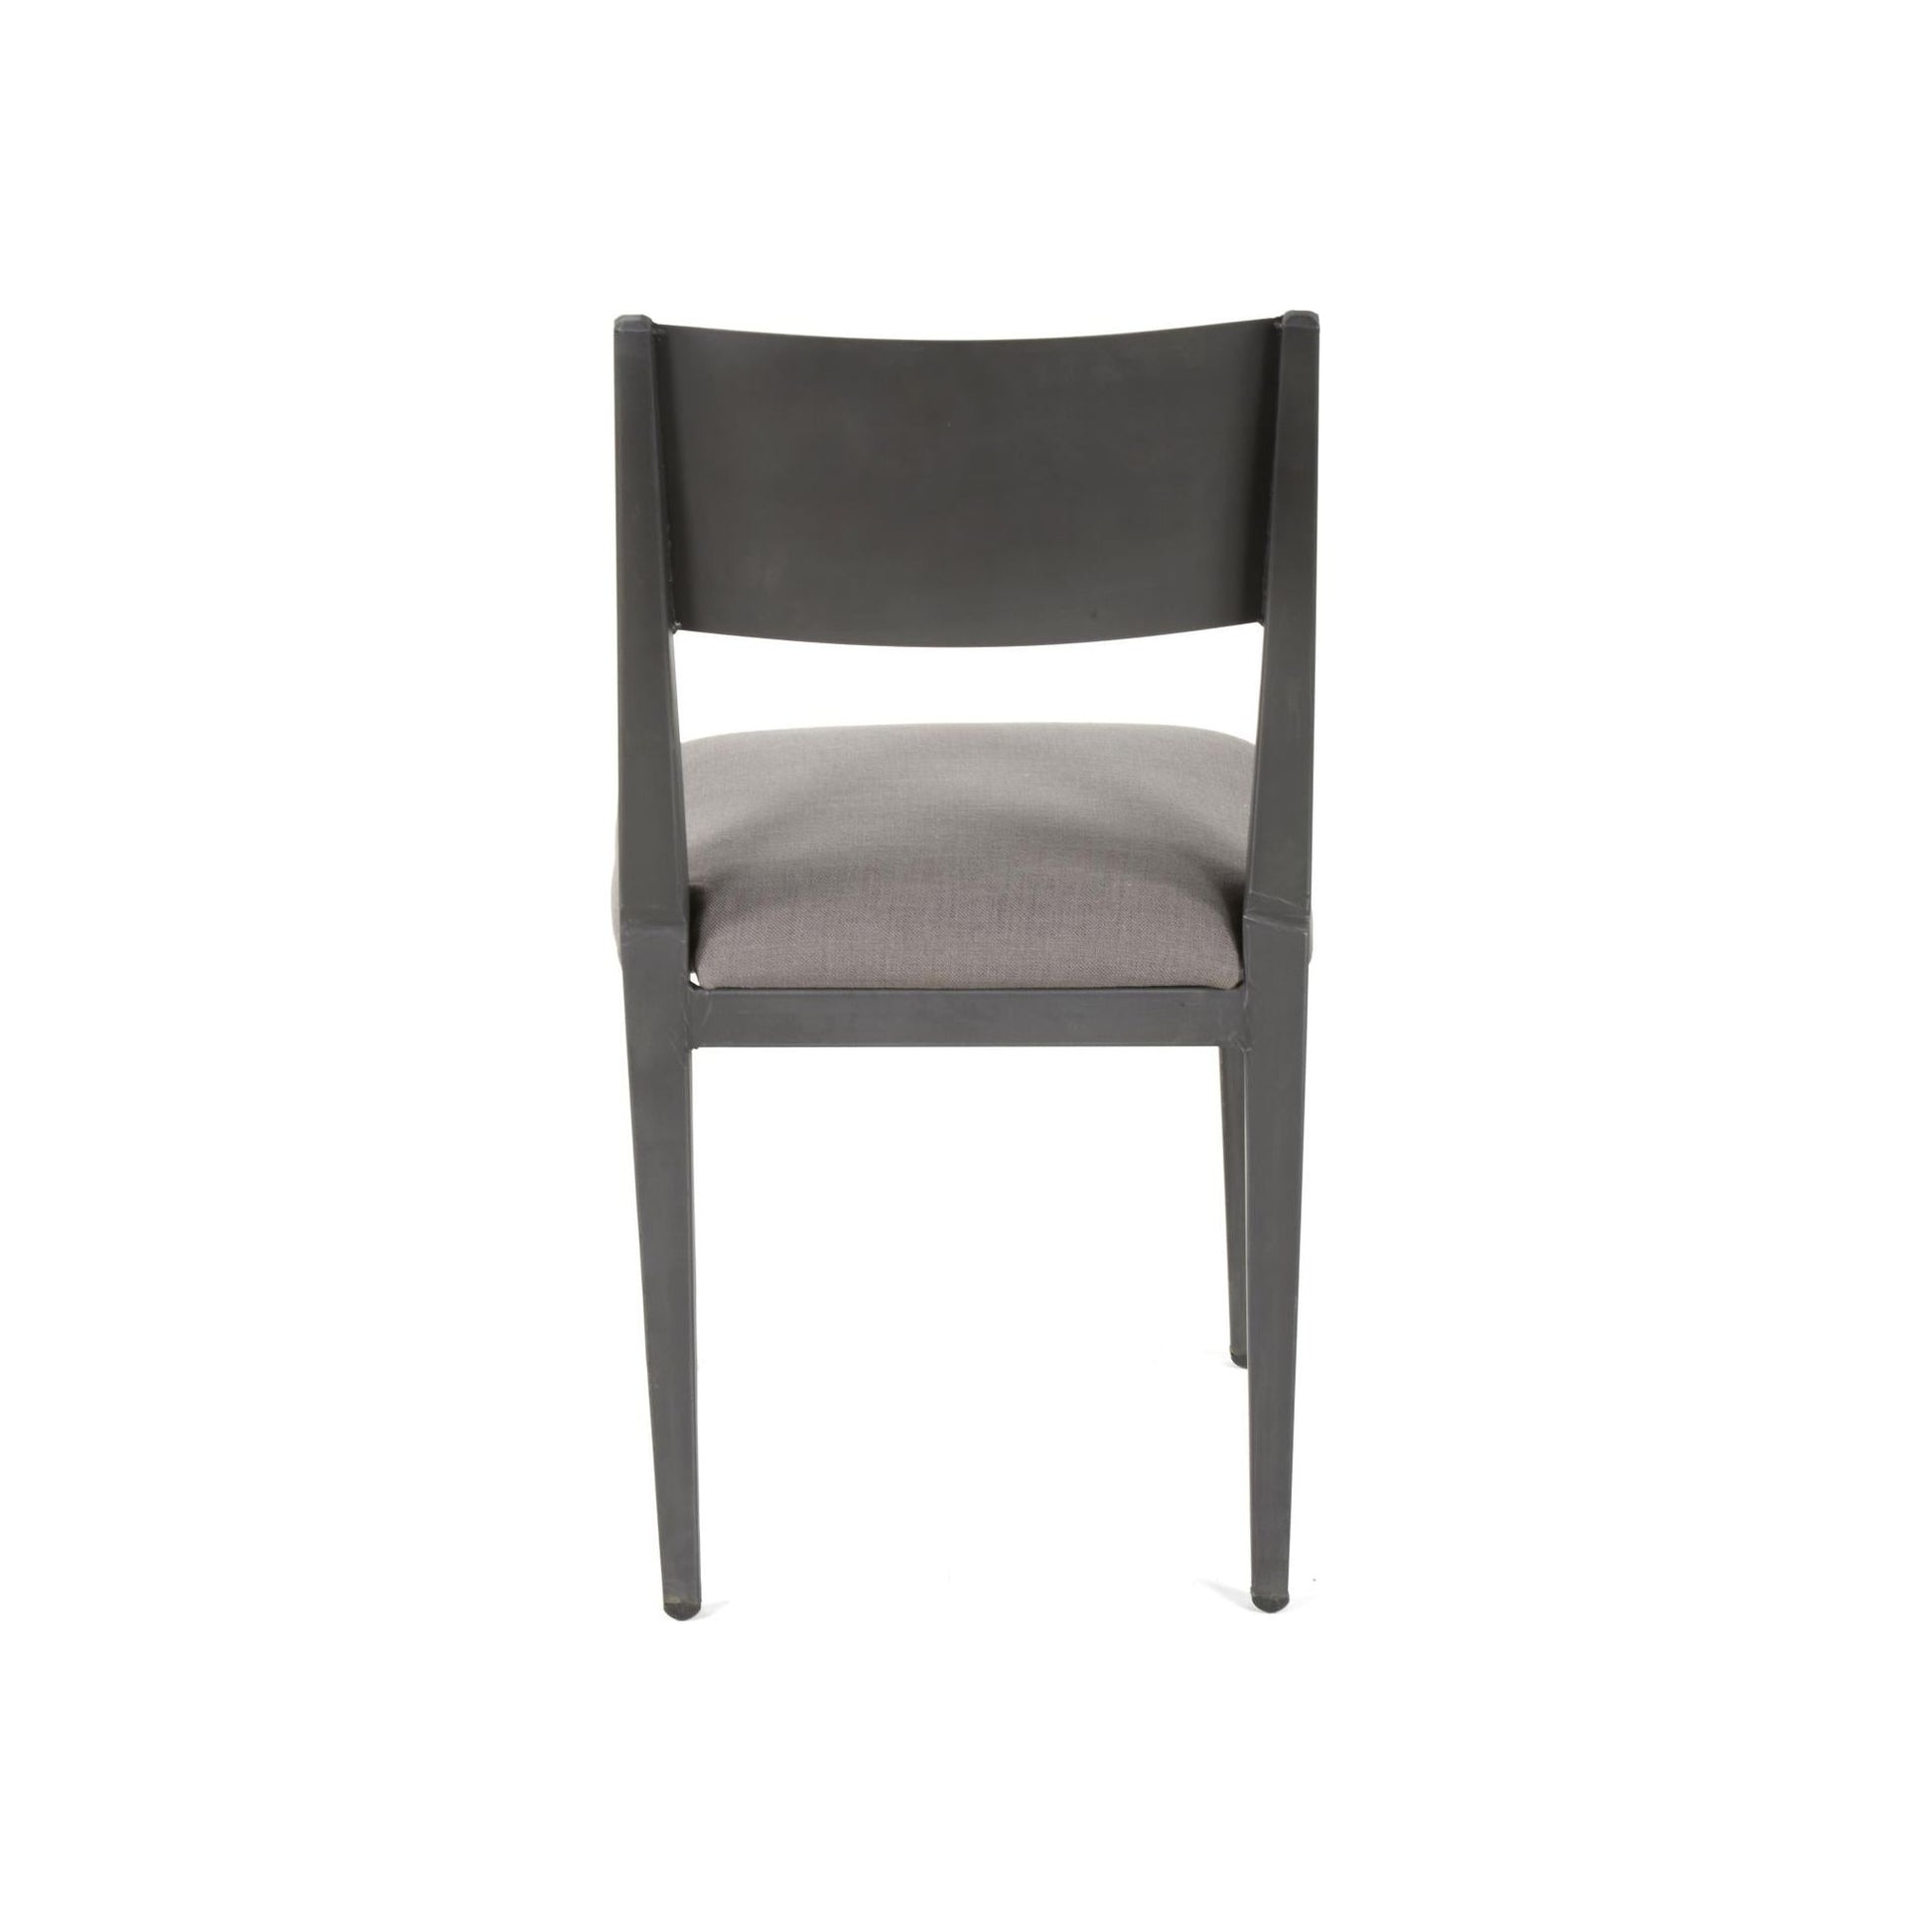 A sleek, modern chair is shown from the back. The Aubrey Metal Dining Chair features a smooth, dark-colored frame with a rectangular backrest and four slim legs. The seat is cushioned and upholstered in a light gray fabric, offering a minimalist and contemporary design. The background is completely white.